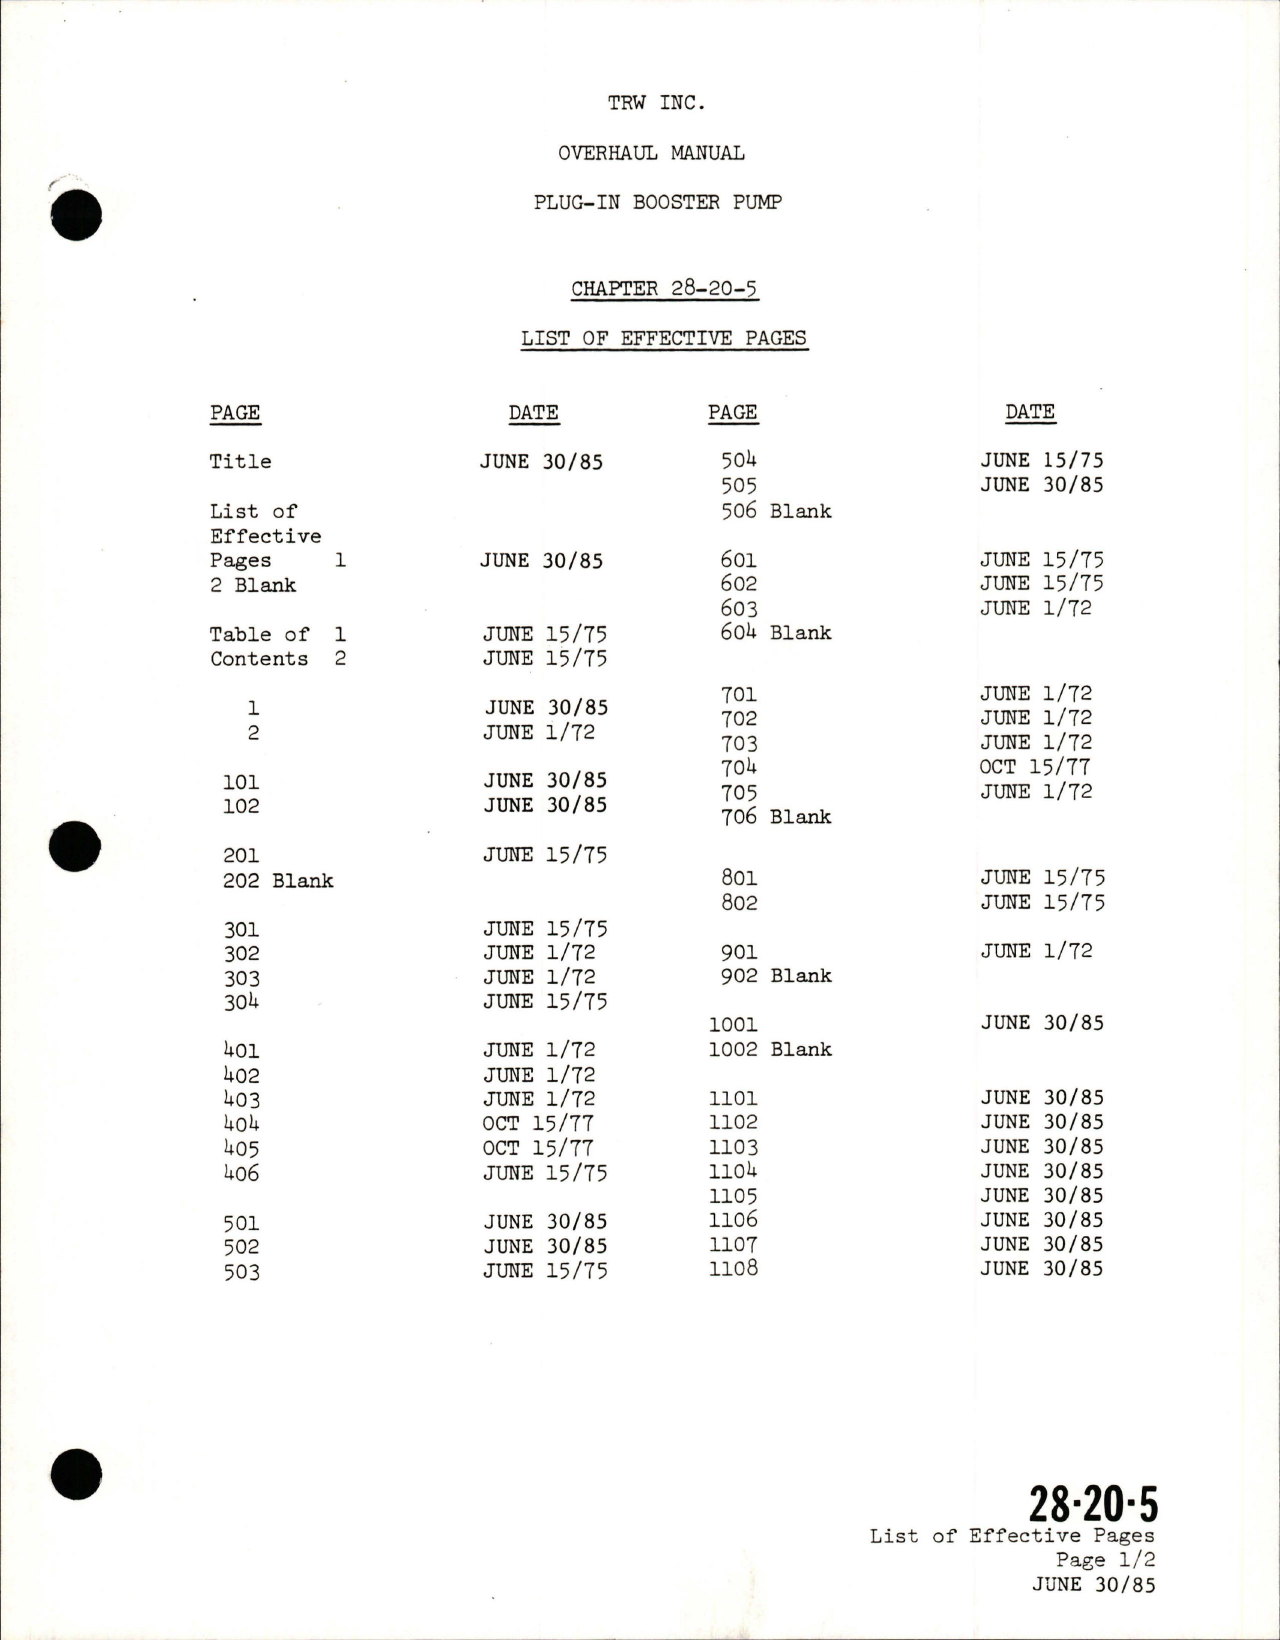 Sample page 5 from AirCorps Library document: Overhaul with Illustrated Parts Catalog for Plug-In Booster Pump - 382300-1, 382300-2, and 3823020-3 